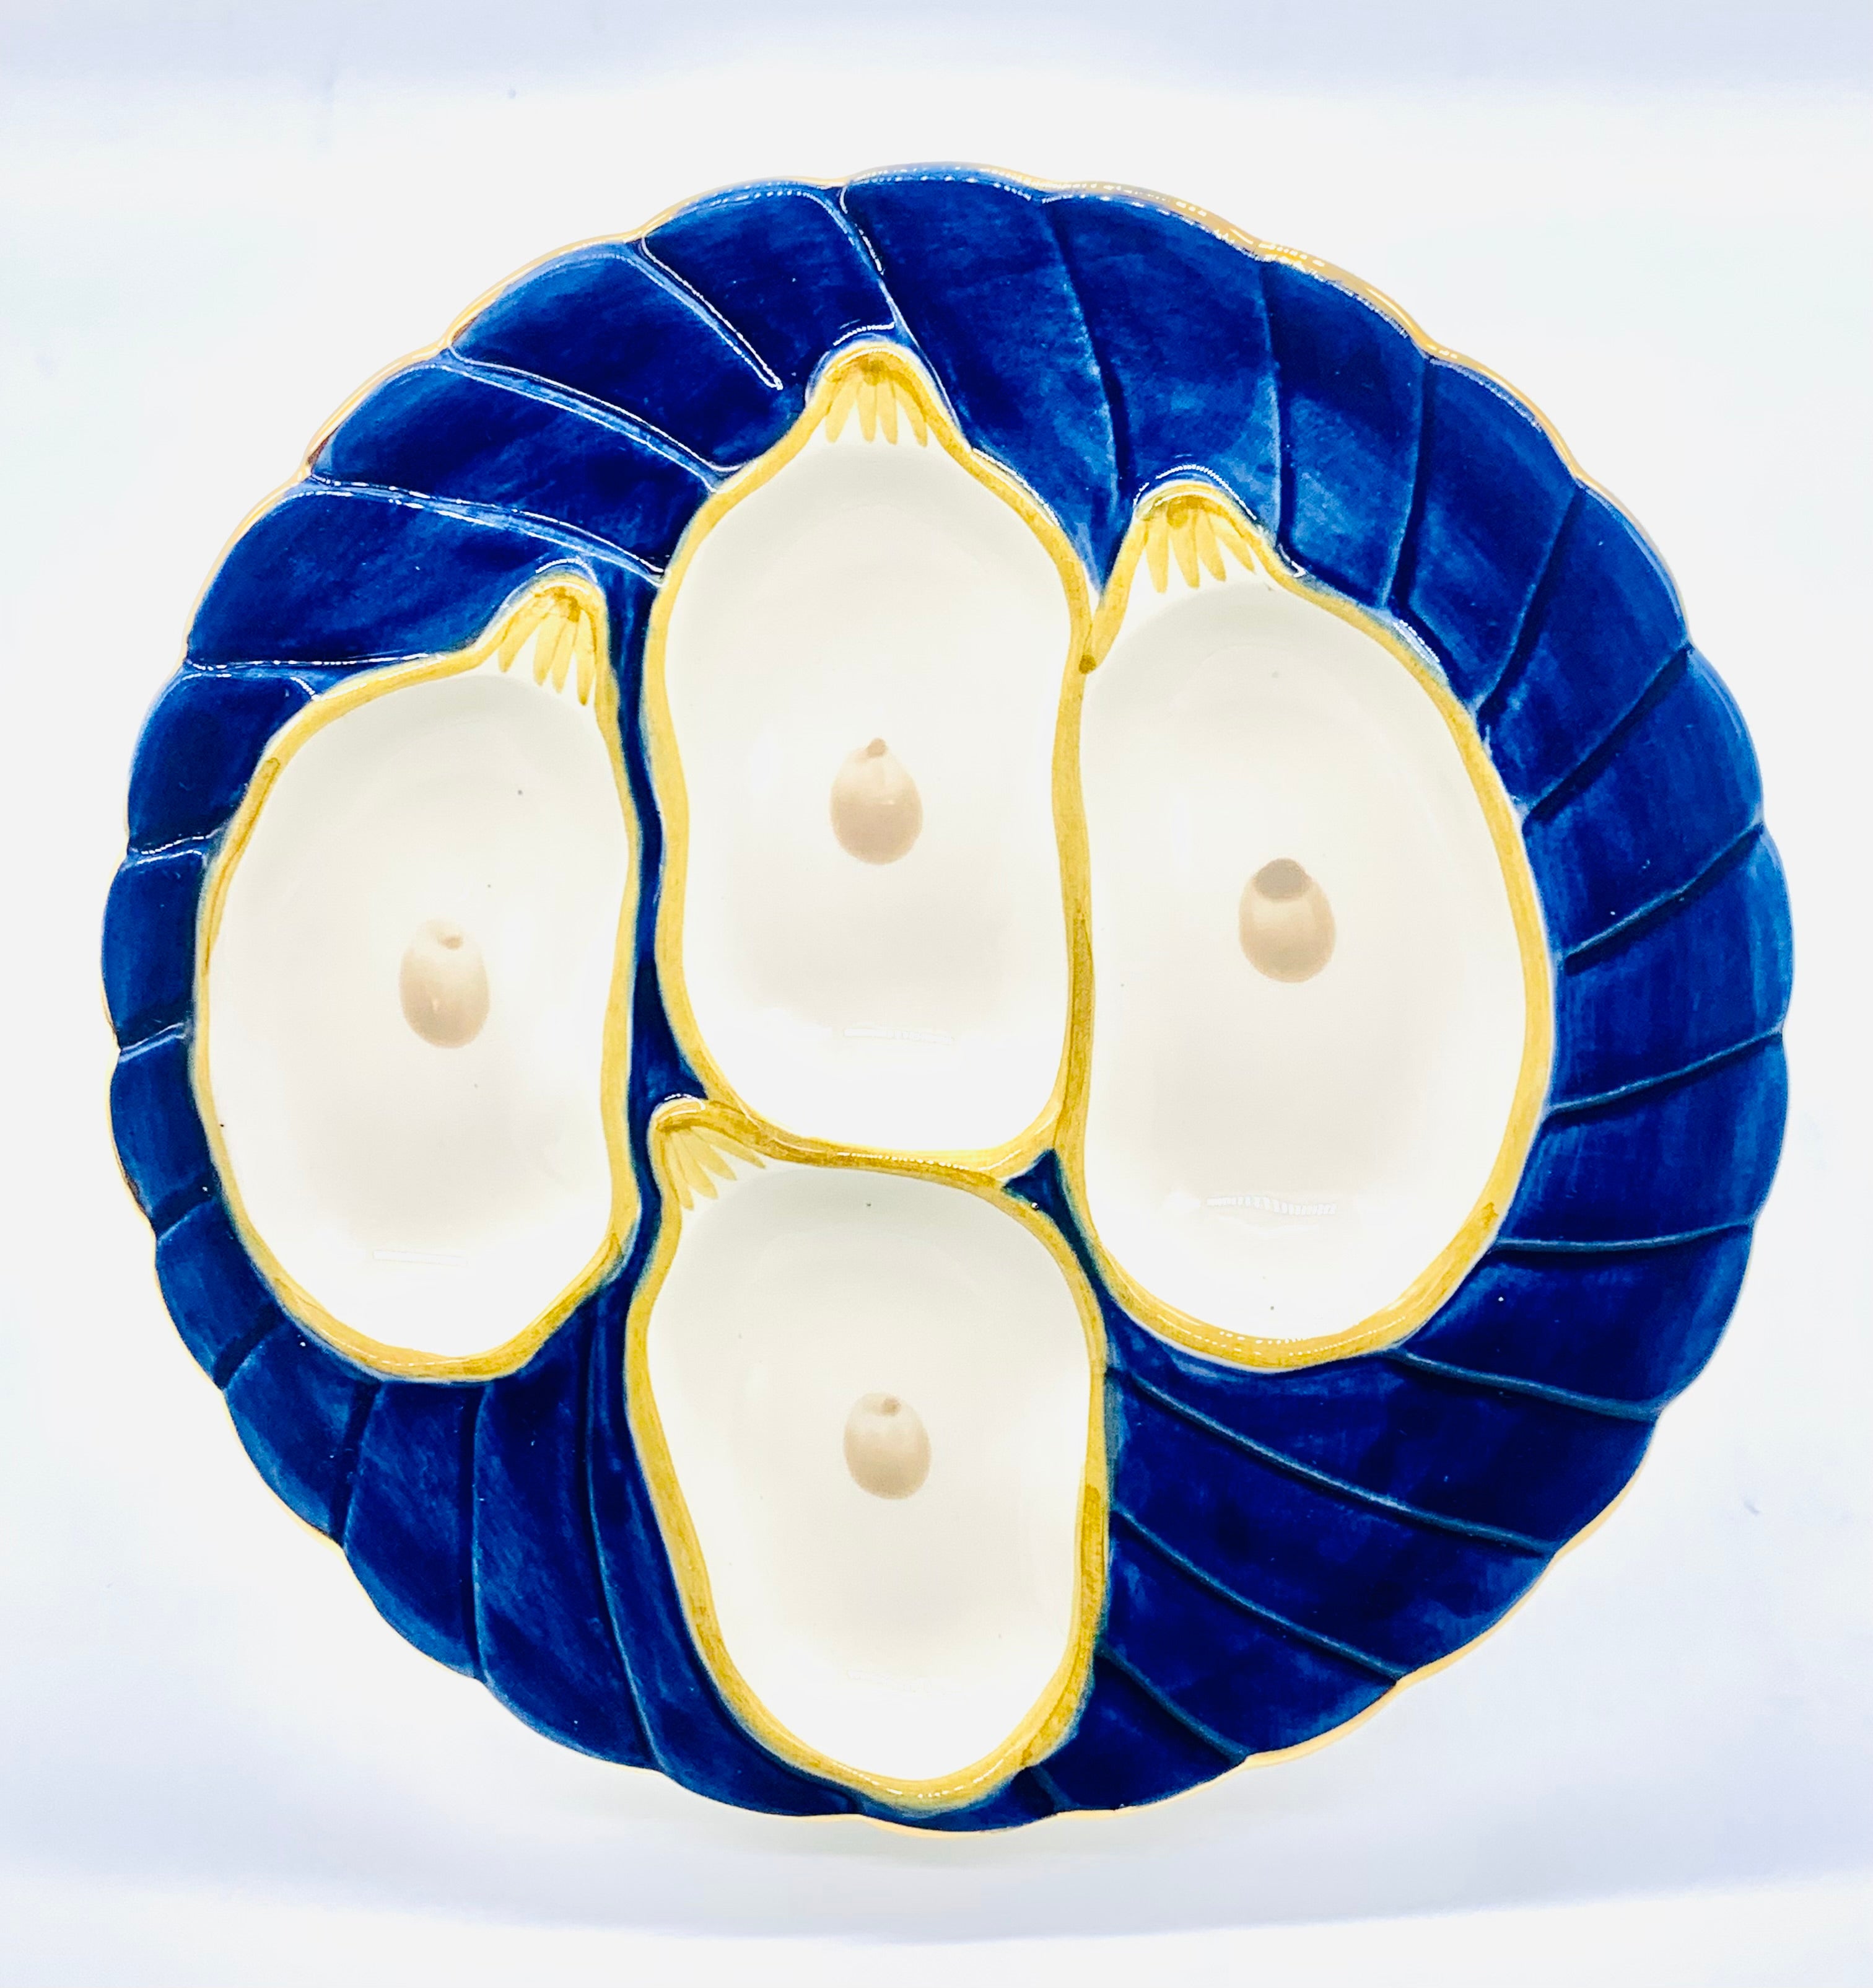 Oyster Plate with Gold Trim - (four colors)